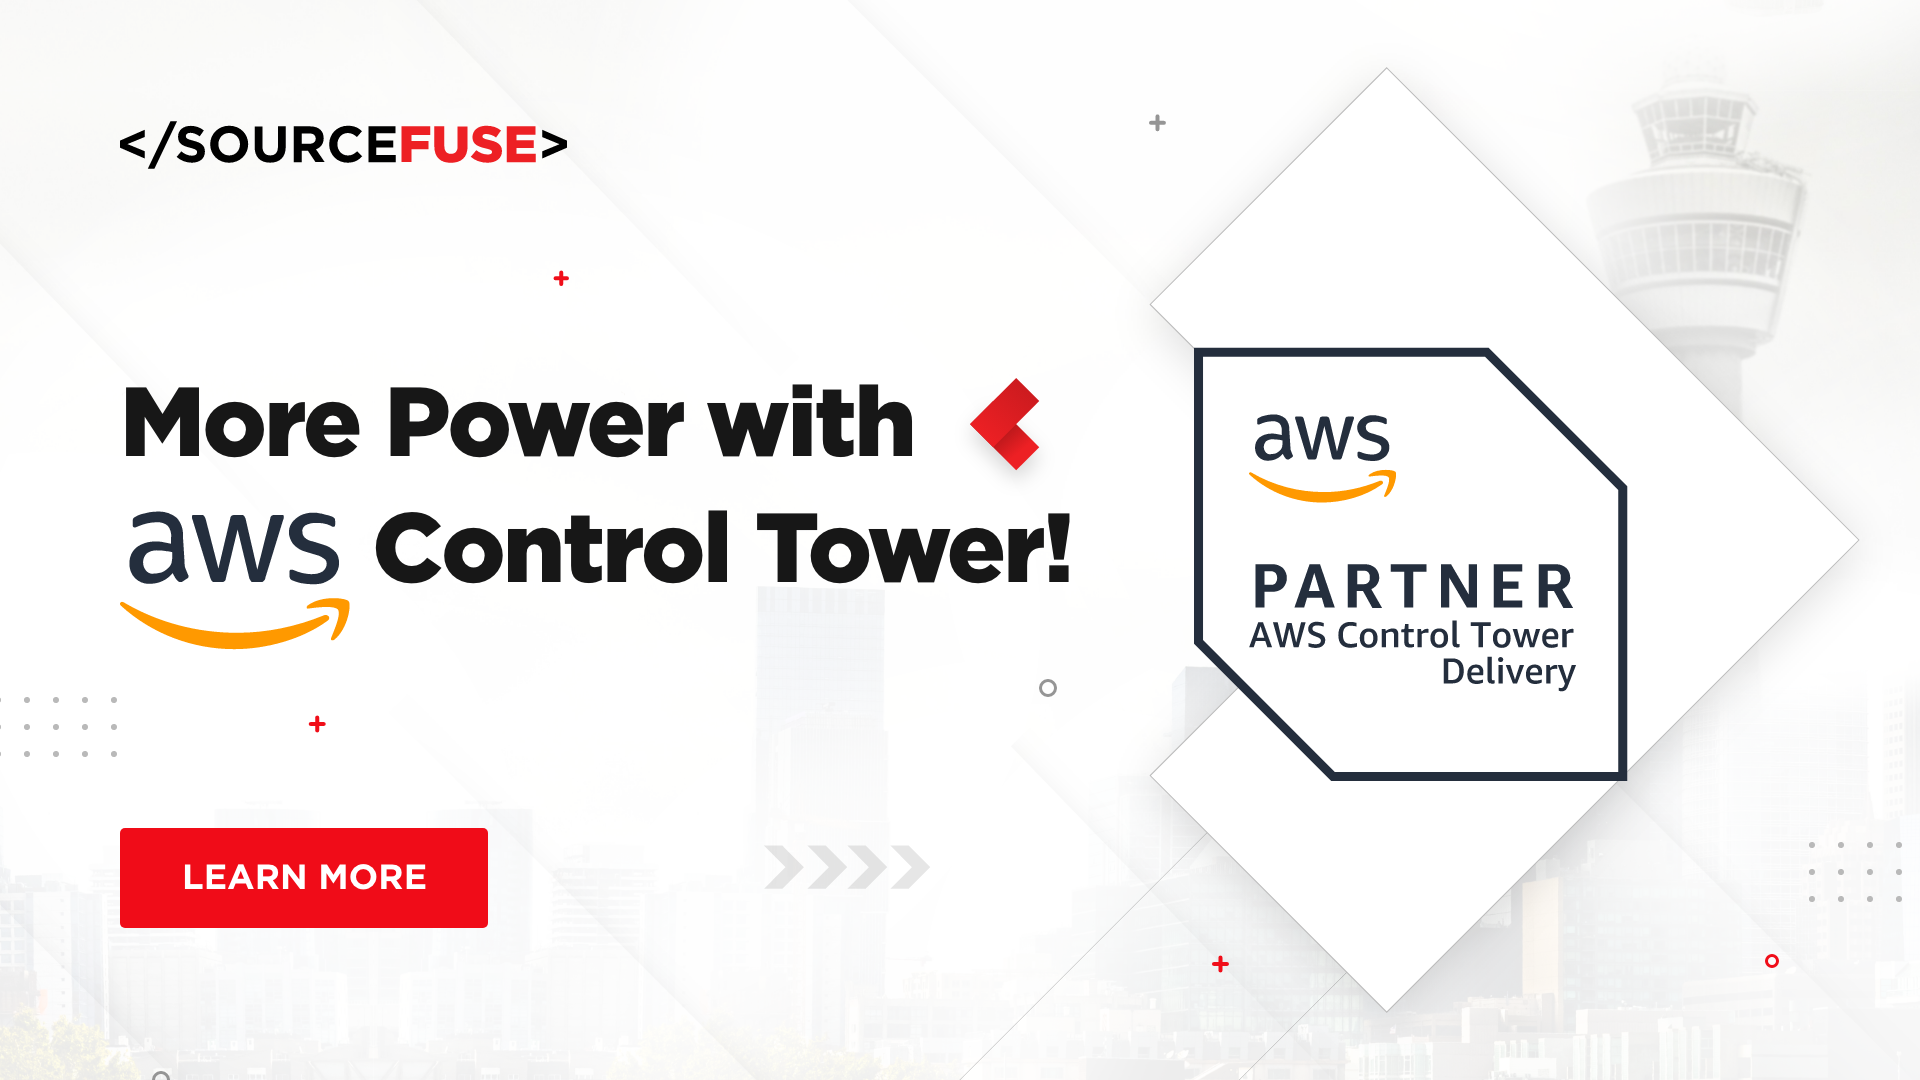 SourceFuse recognized as AWS Control Tower Service Delivery Partner